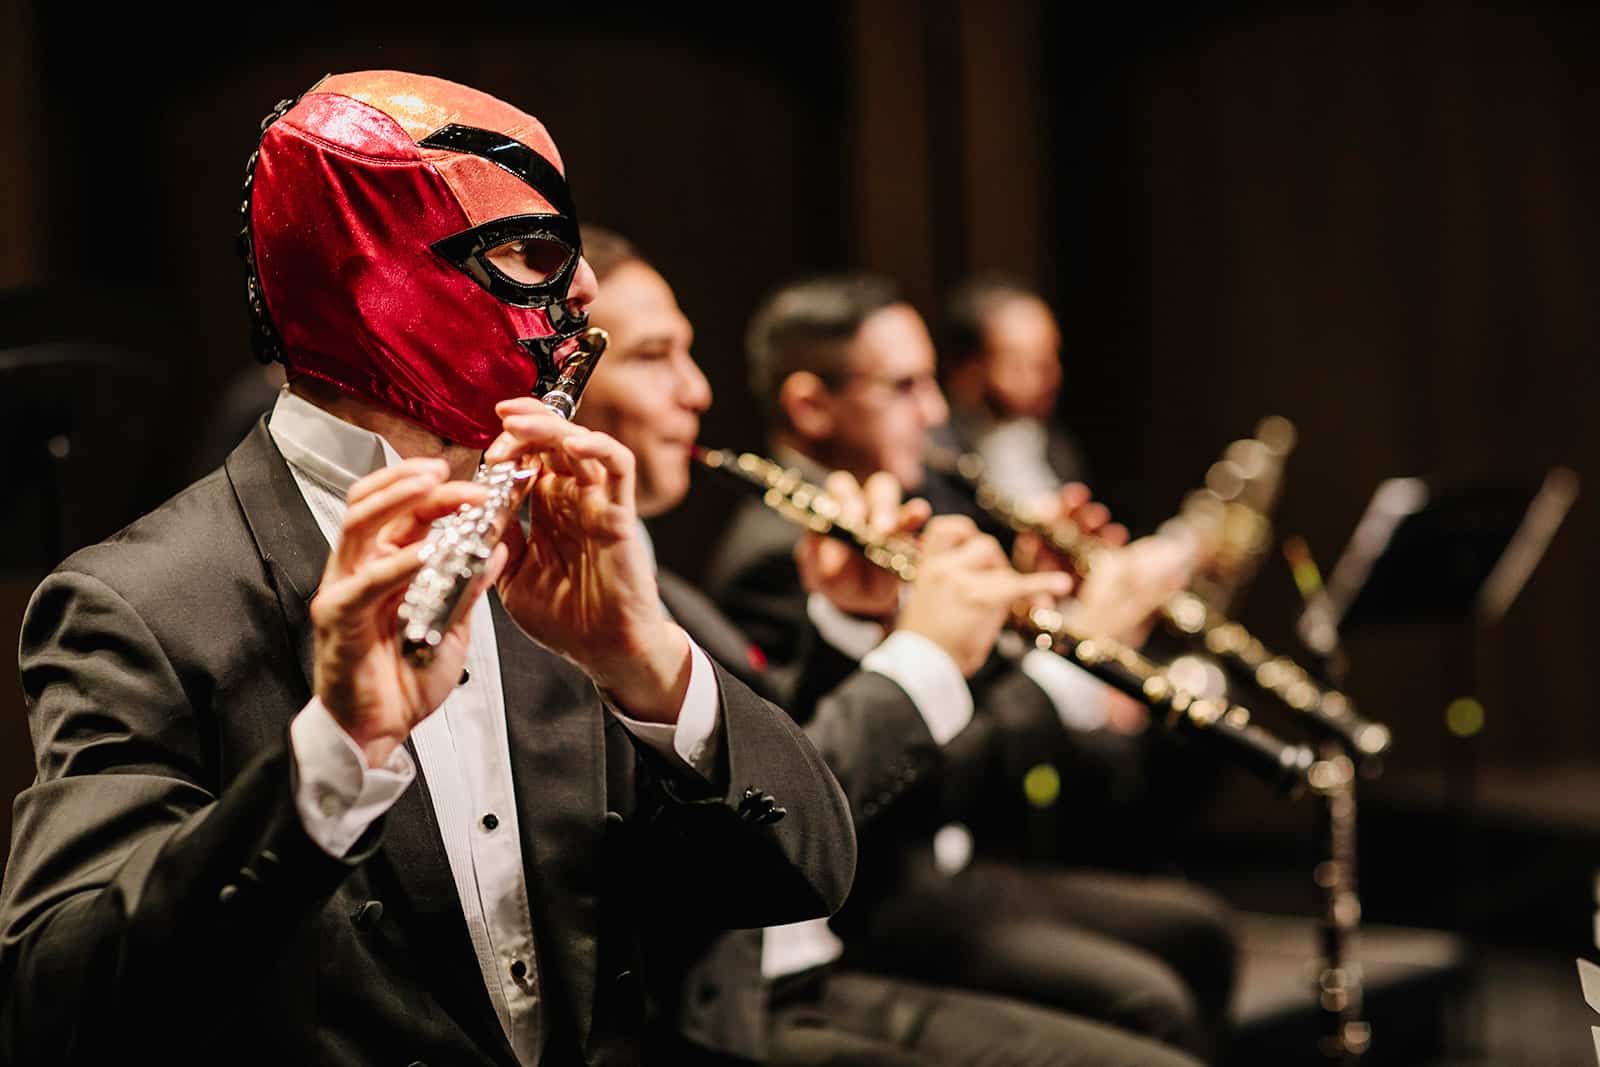 Row of flautists, the closest wearing red and orange luchador mask